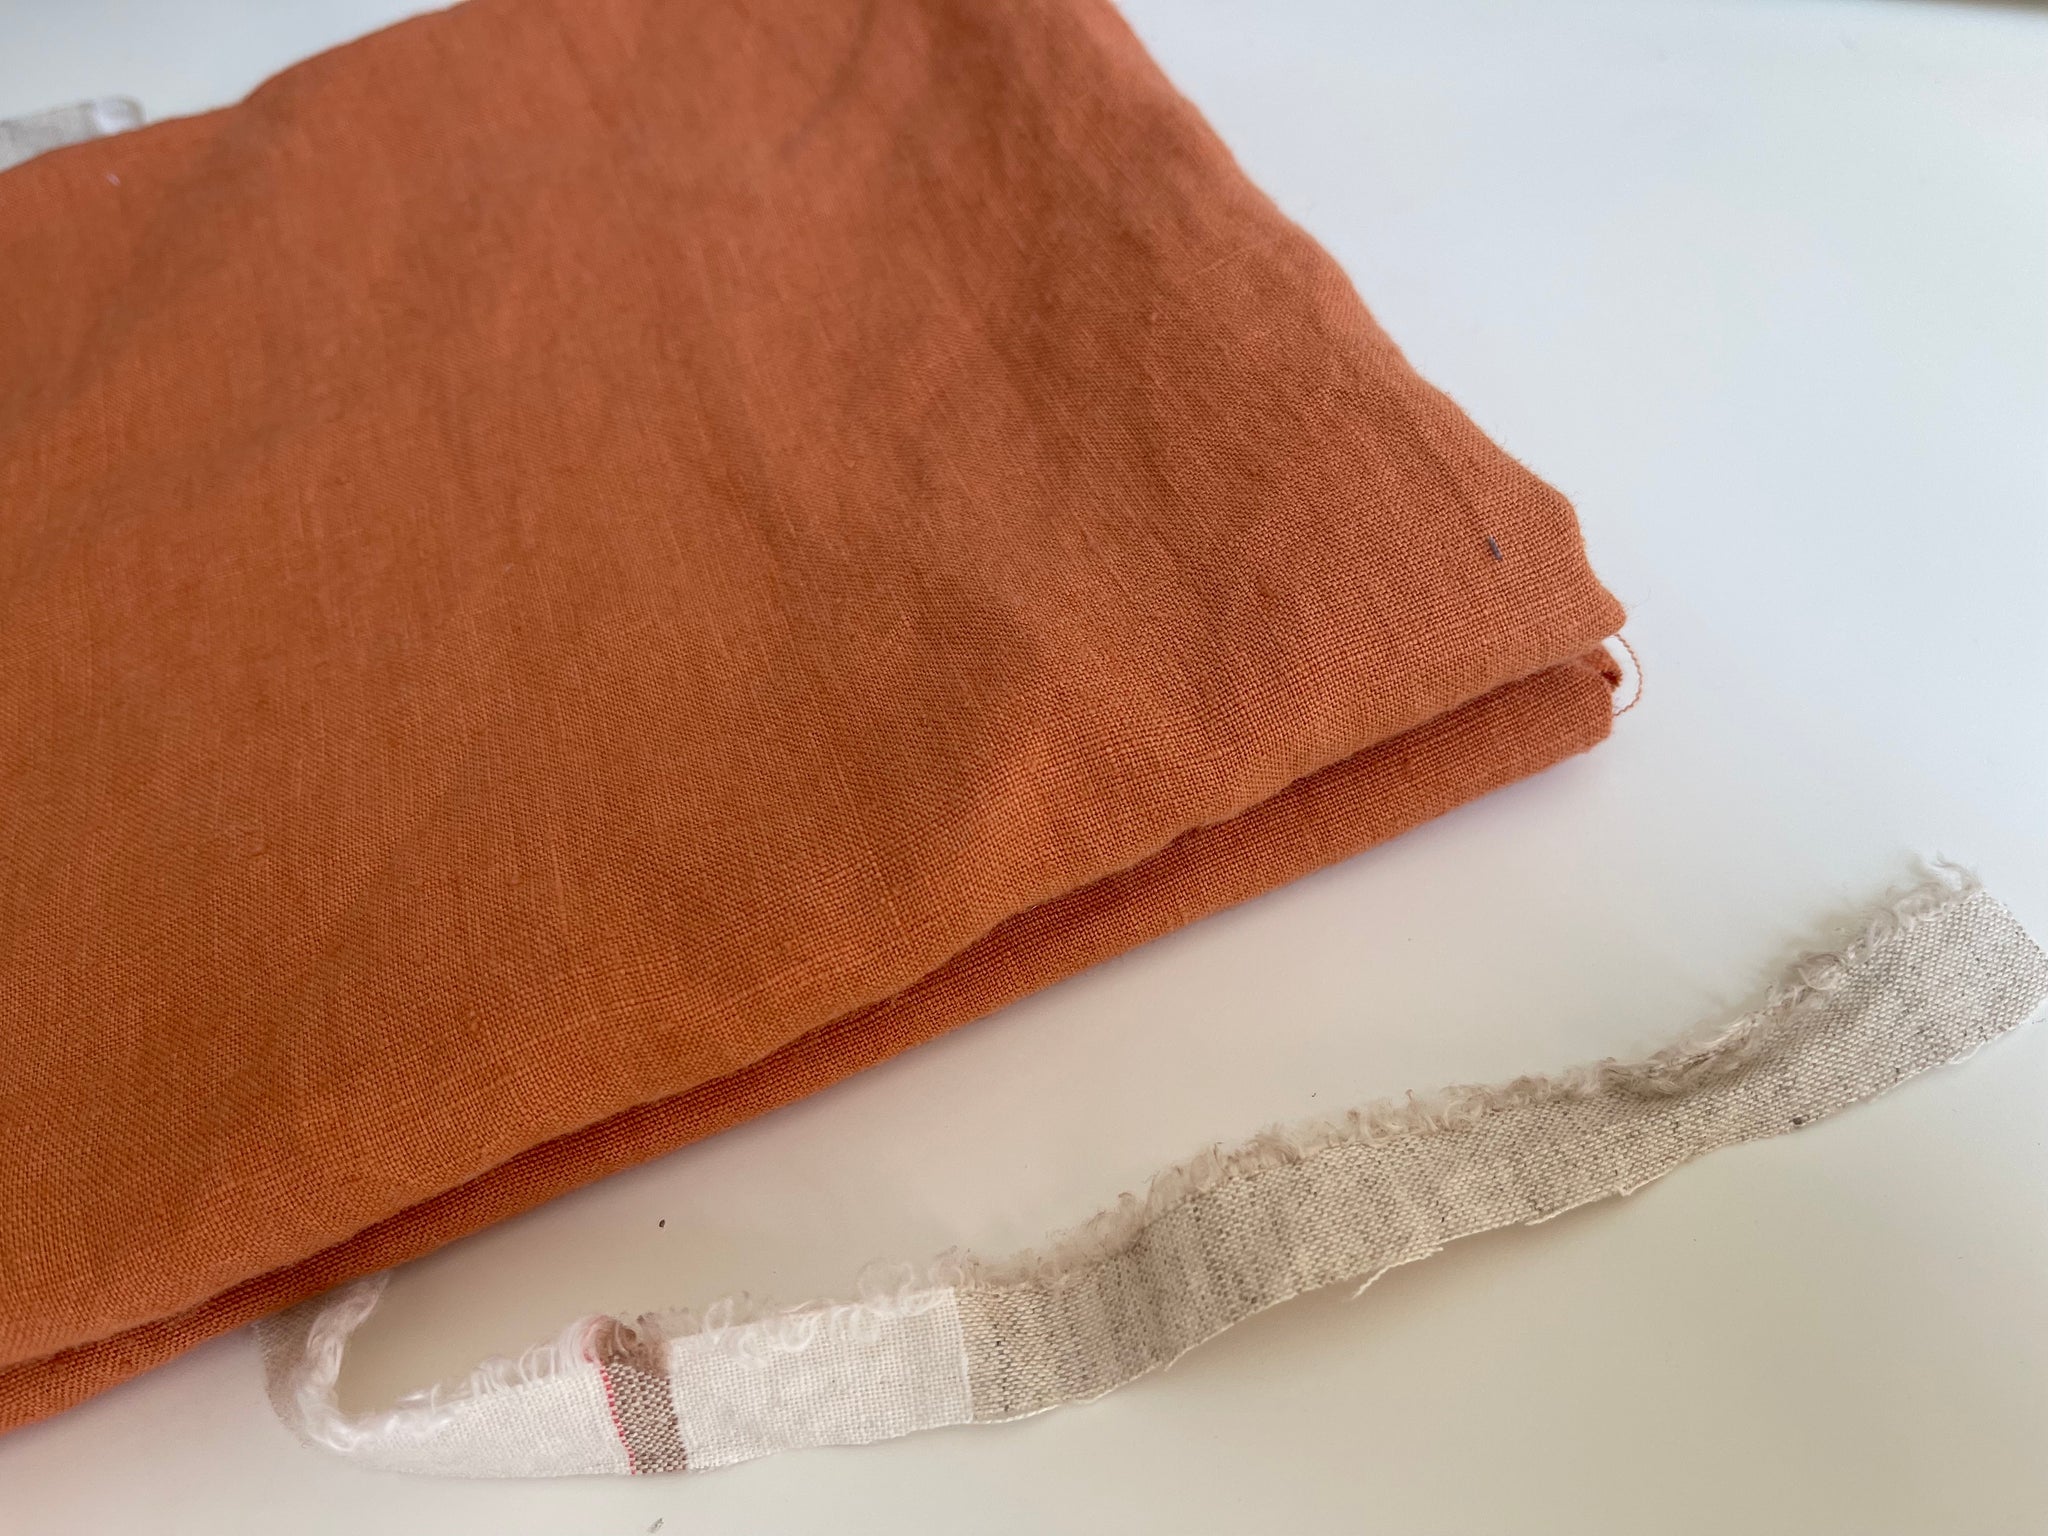 Linen Fabric Remnants - Terracotta - small holes along selvage